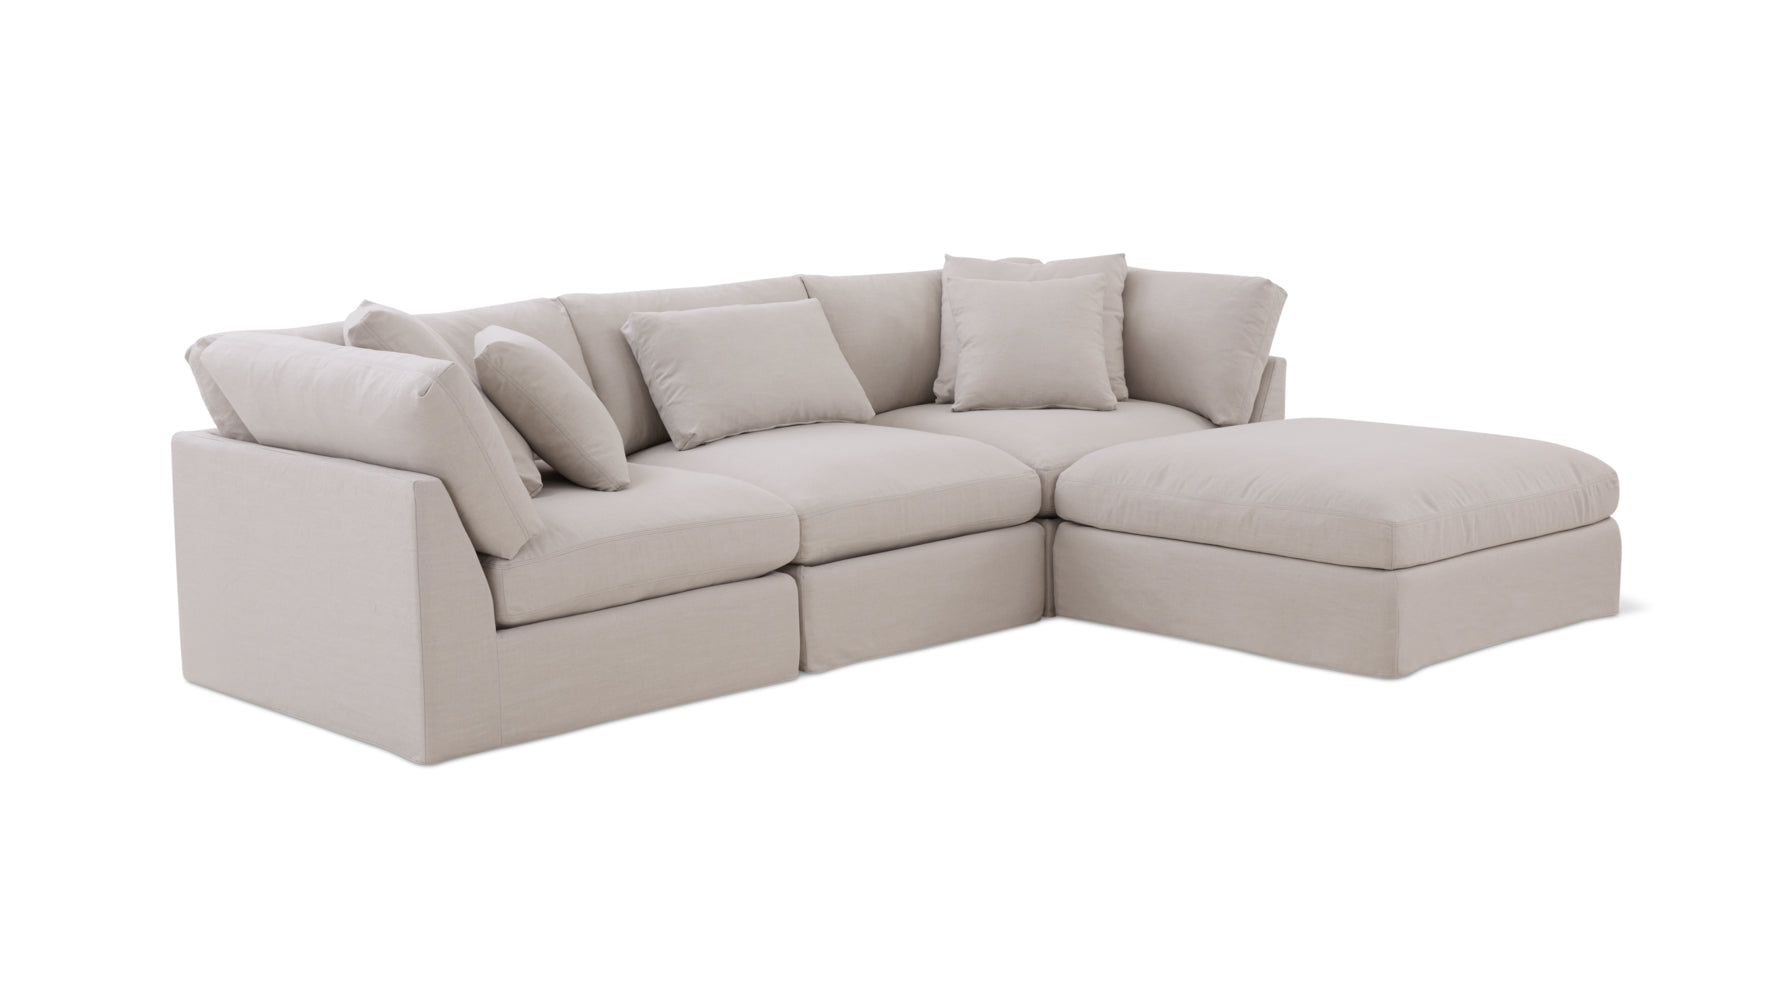 Get Together™ 4-Piece Modular Sectional, Large, Clay - Image 3